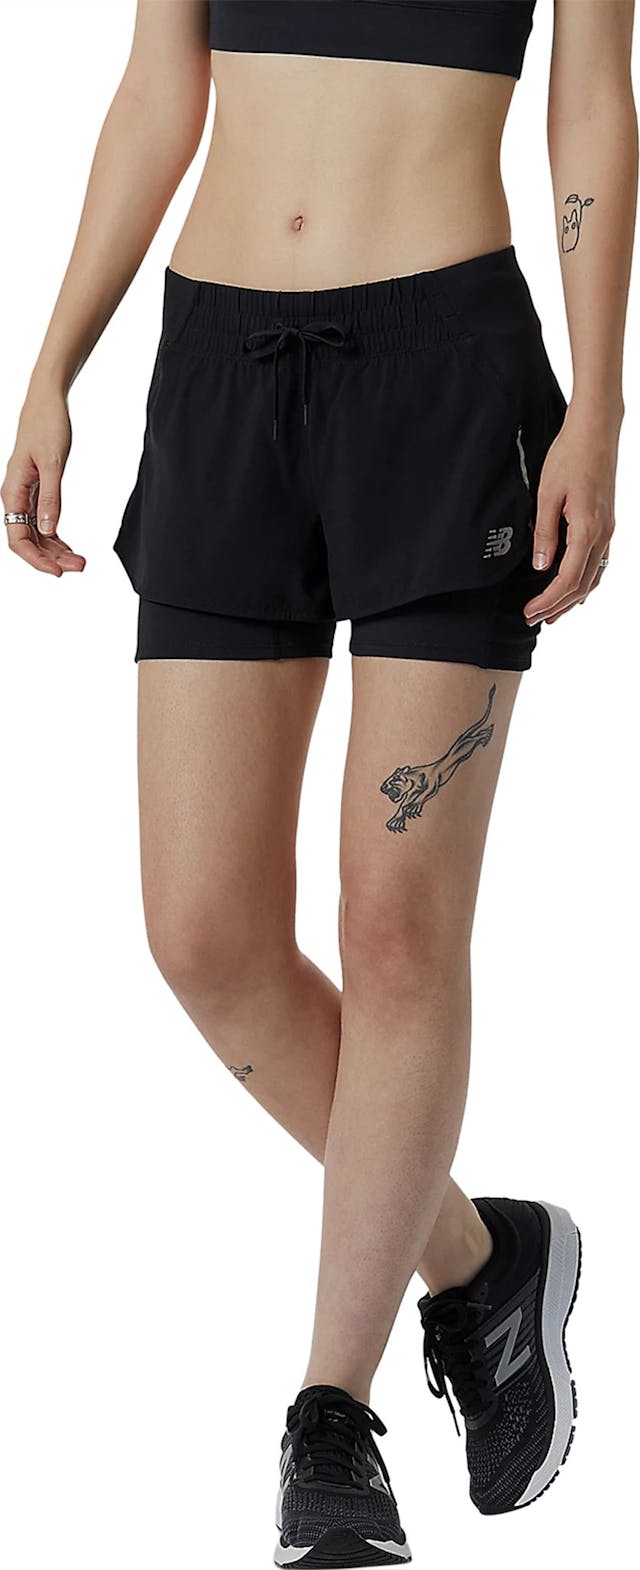 Product image for Impact Run 2-In-1 Short - Women's